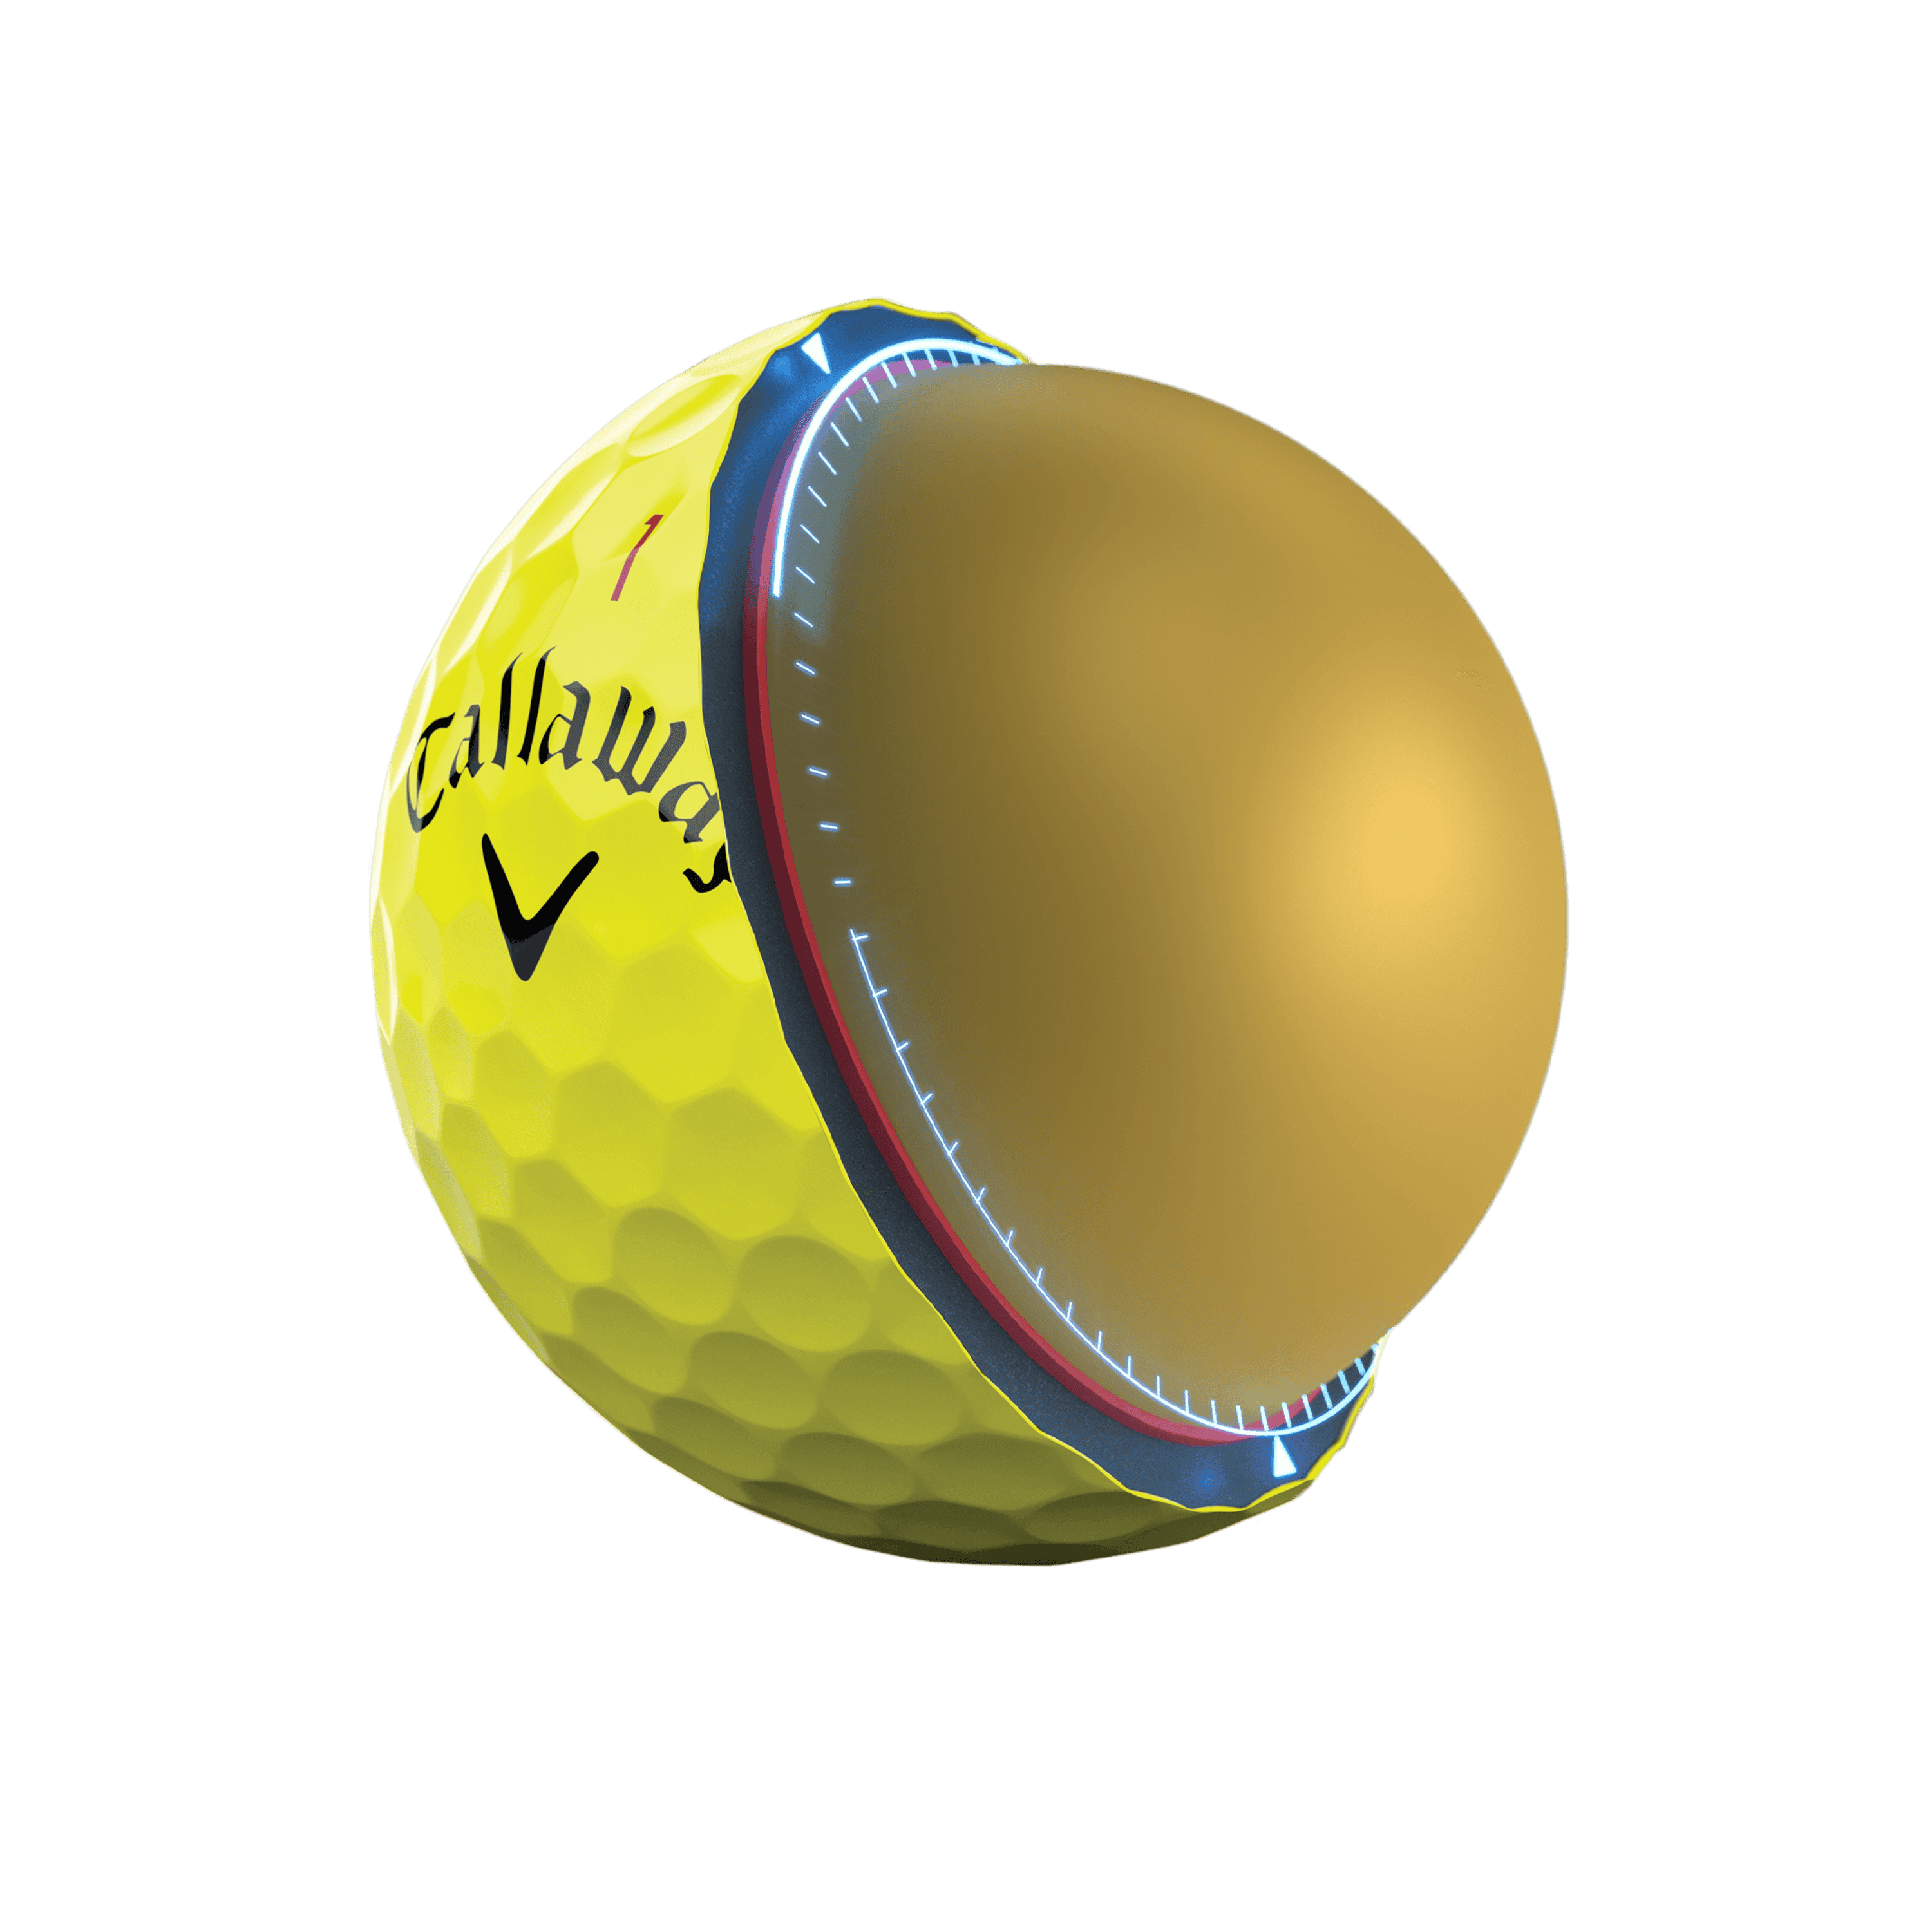 Chrome Tour Yellow Golf Balls features and benefits